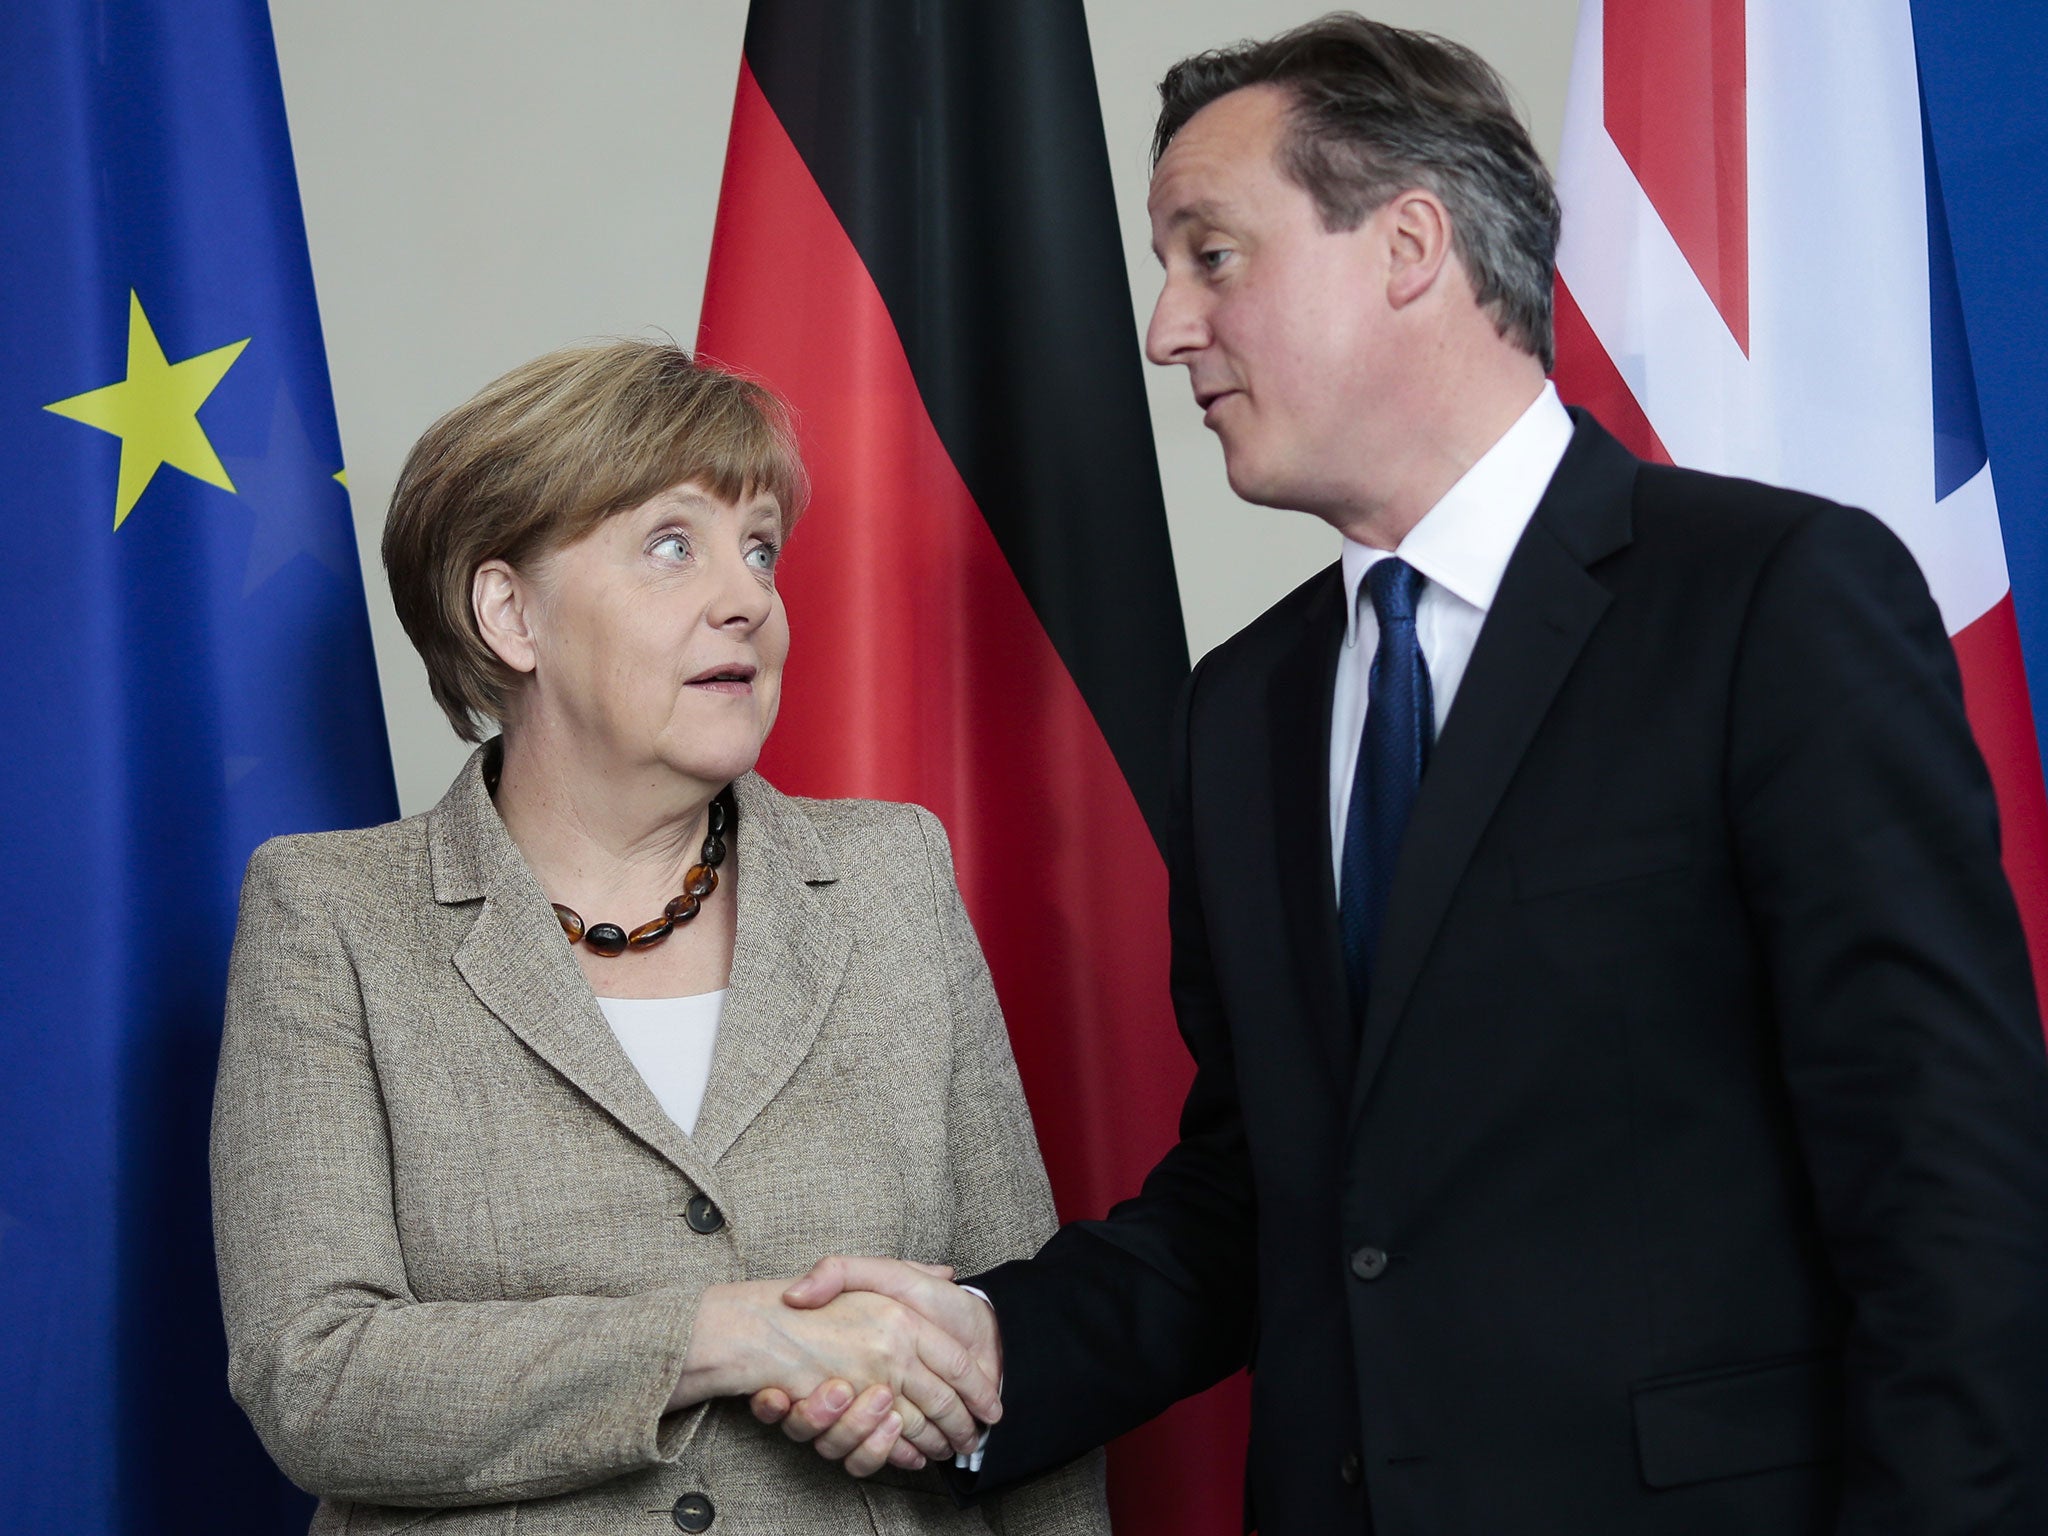 File photo of German Chancellor Angela Merkel, left, and British Prime Minister David Cameron as they shake hands after a news conference following a meeting at the chancellery in Berlin, Germany, May 2015